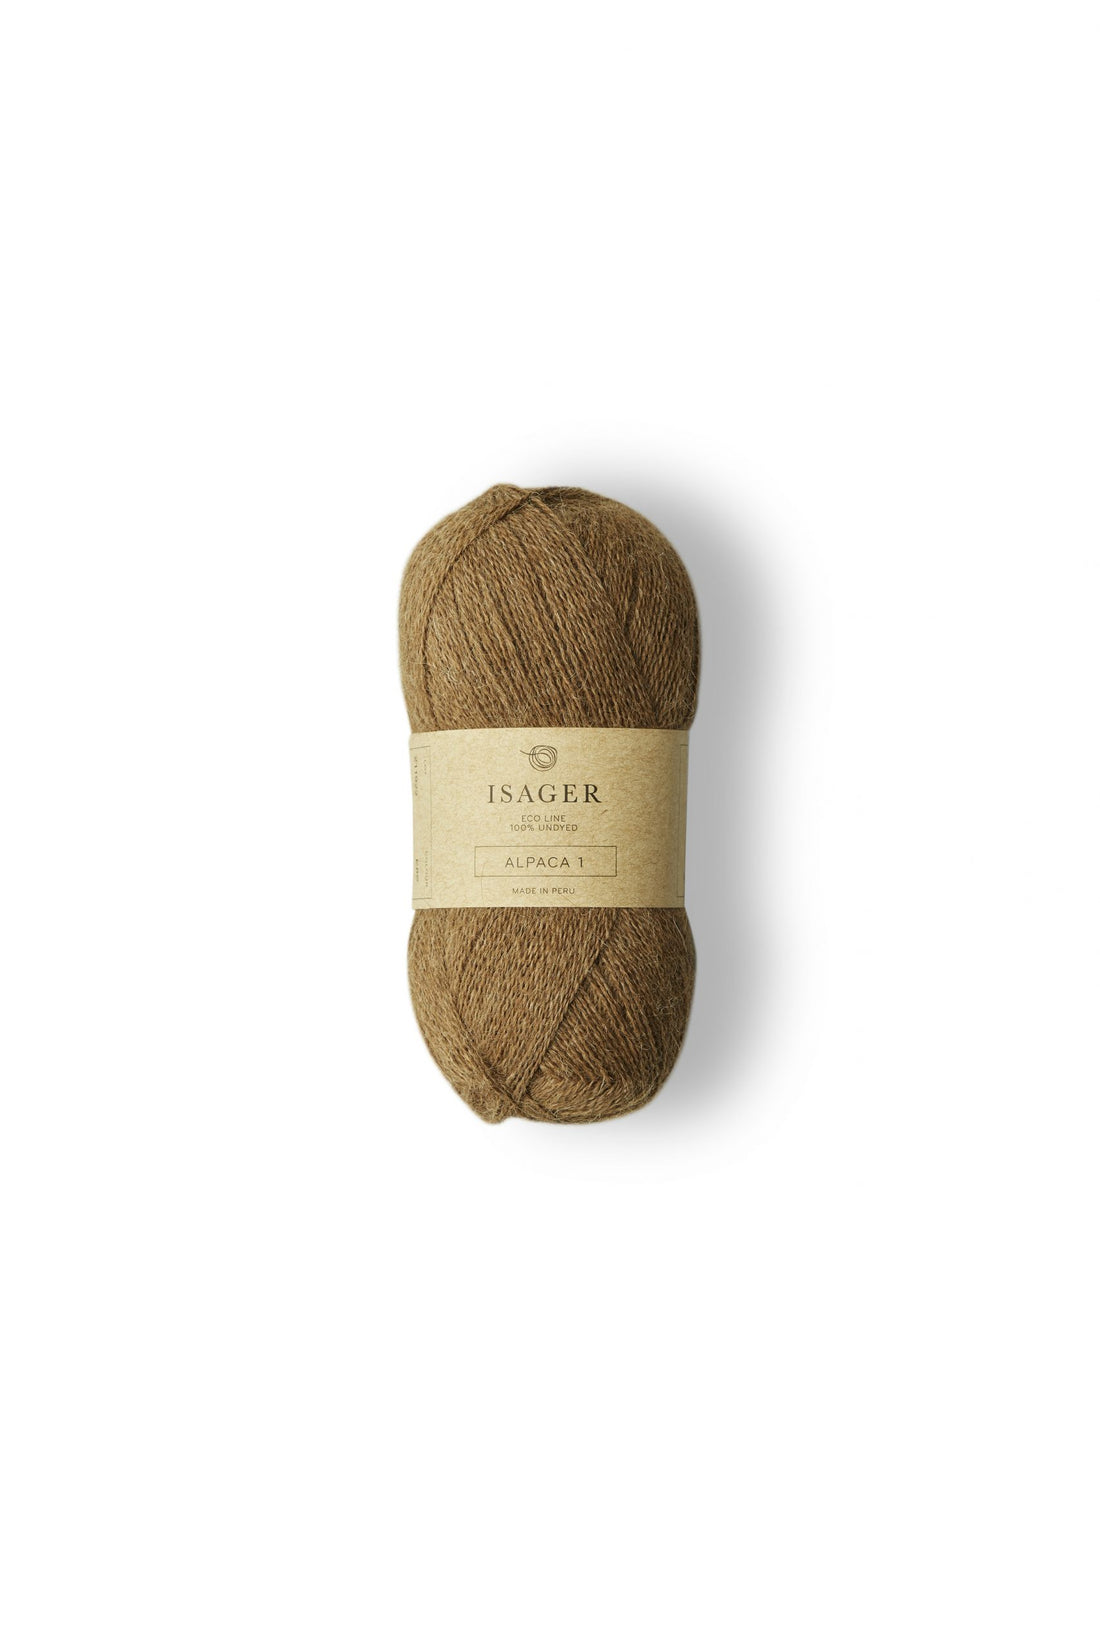 Isager Eco Soft E4S Dark Brown Undyed – Wool and Company